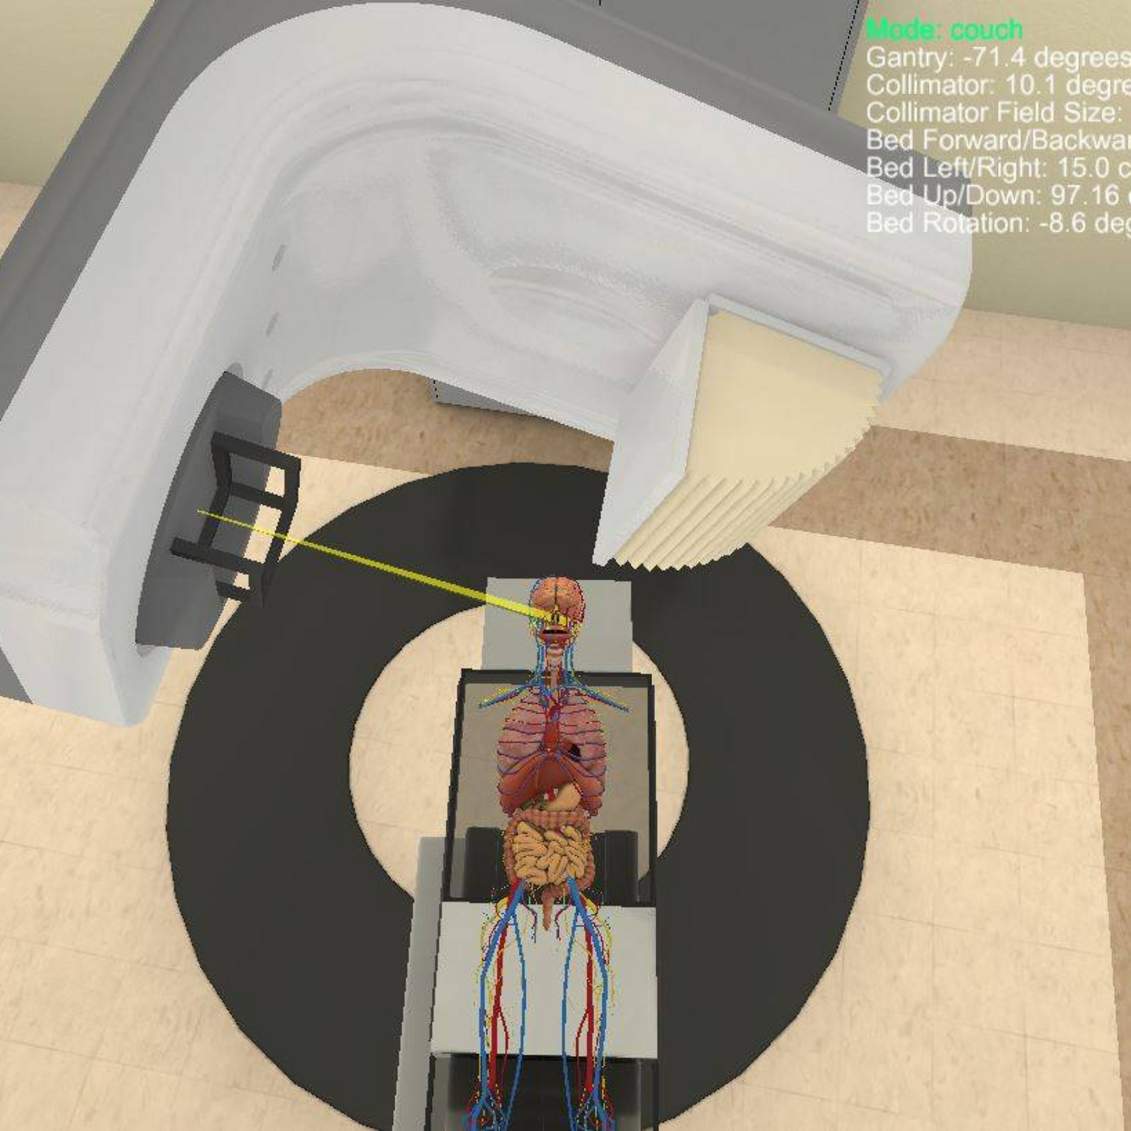 Setting up the patient in organ view